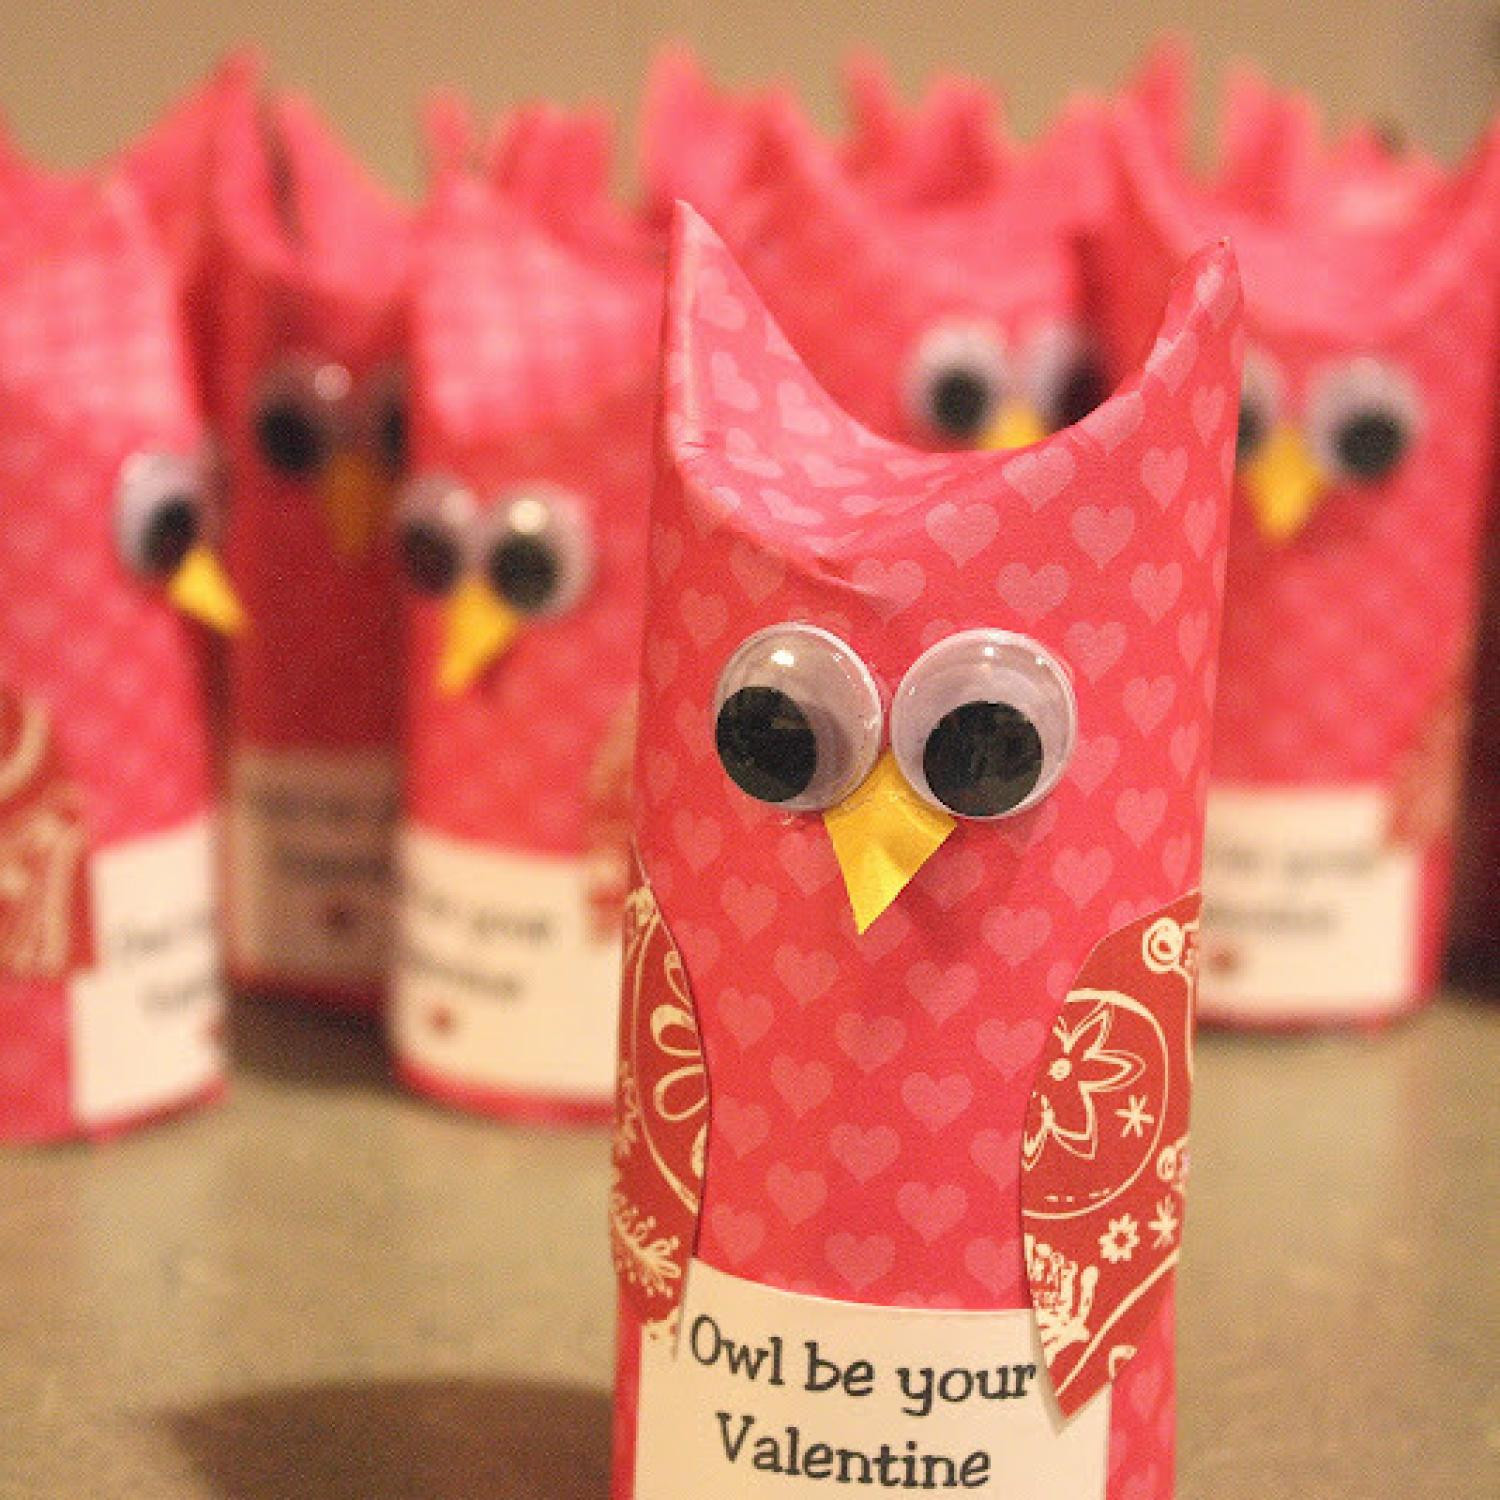 Valentines Gift Ideas For Parents
 Our Favorite Homemade Valentines for Kids